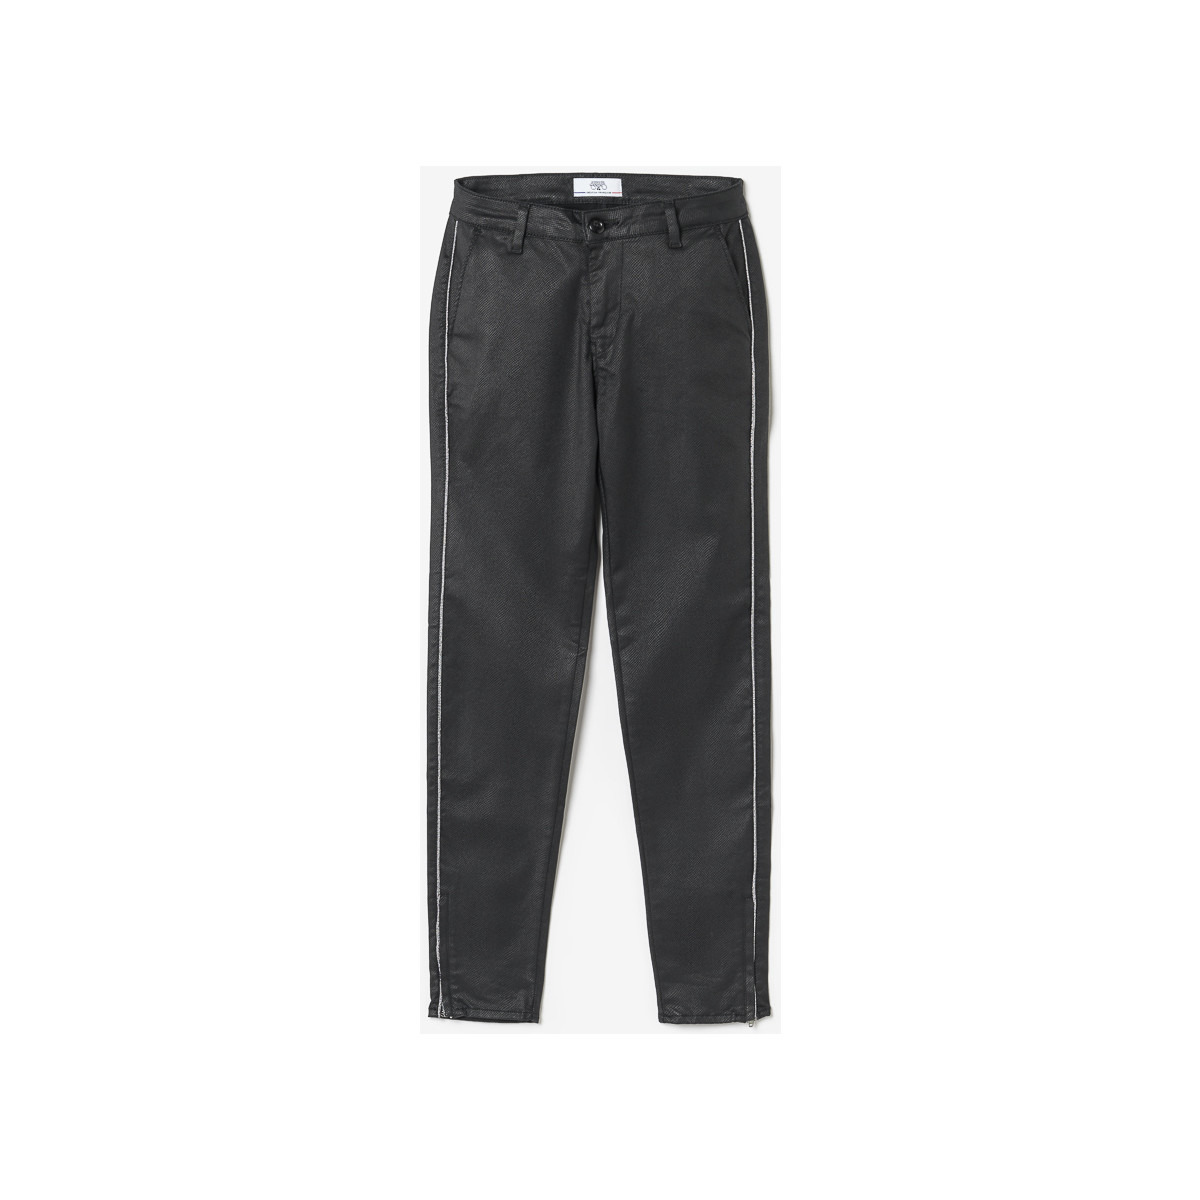 Black Chino Pants for Women by Spartoo GOOFASH